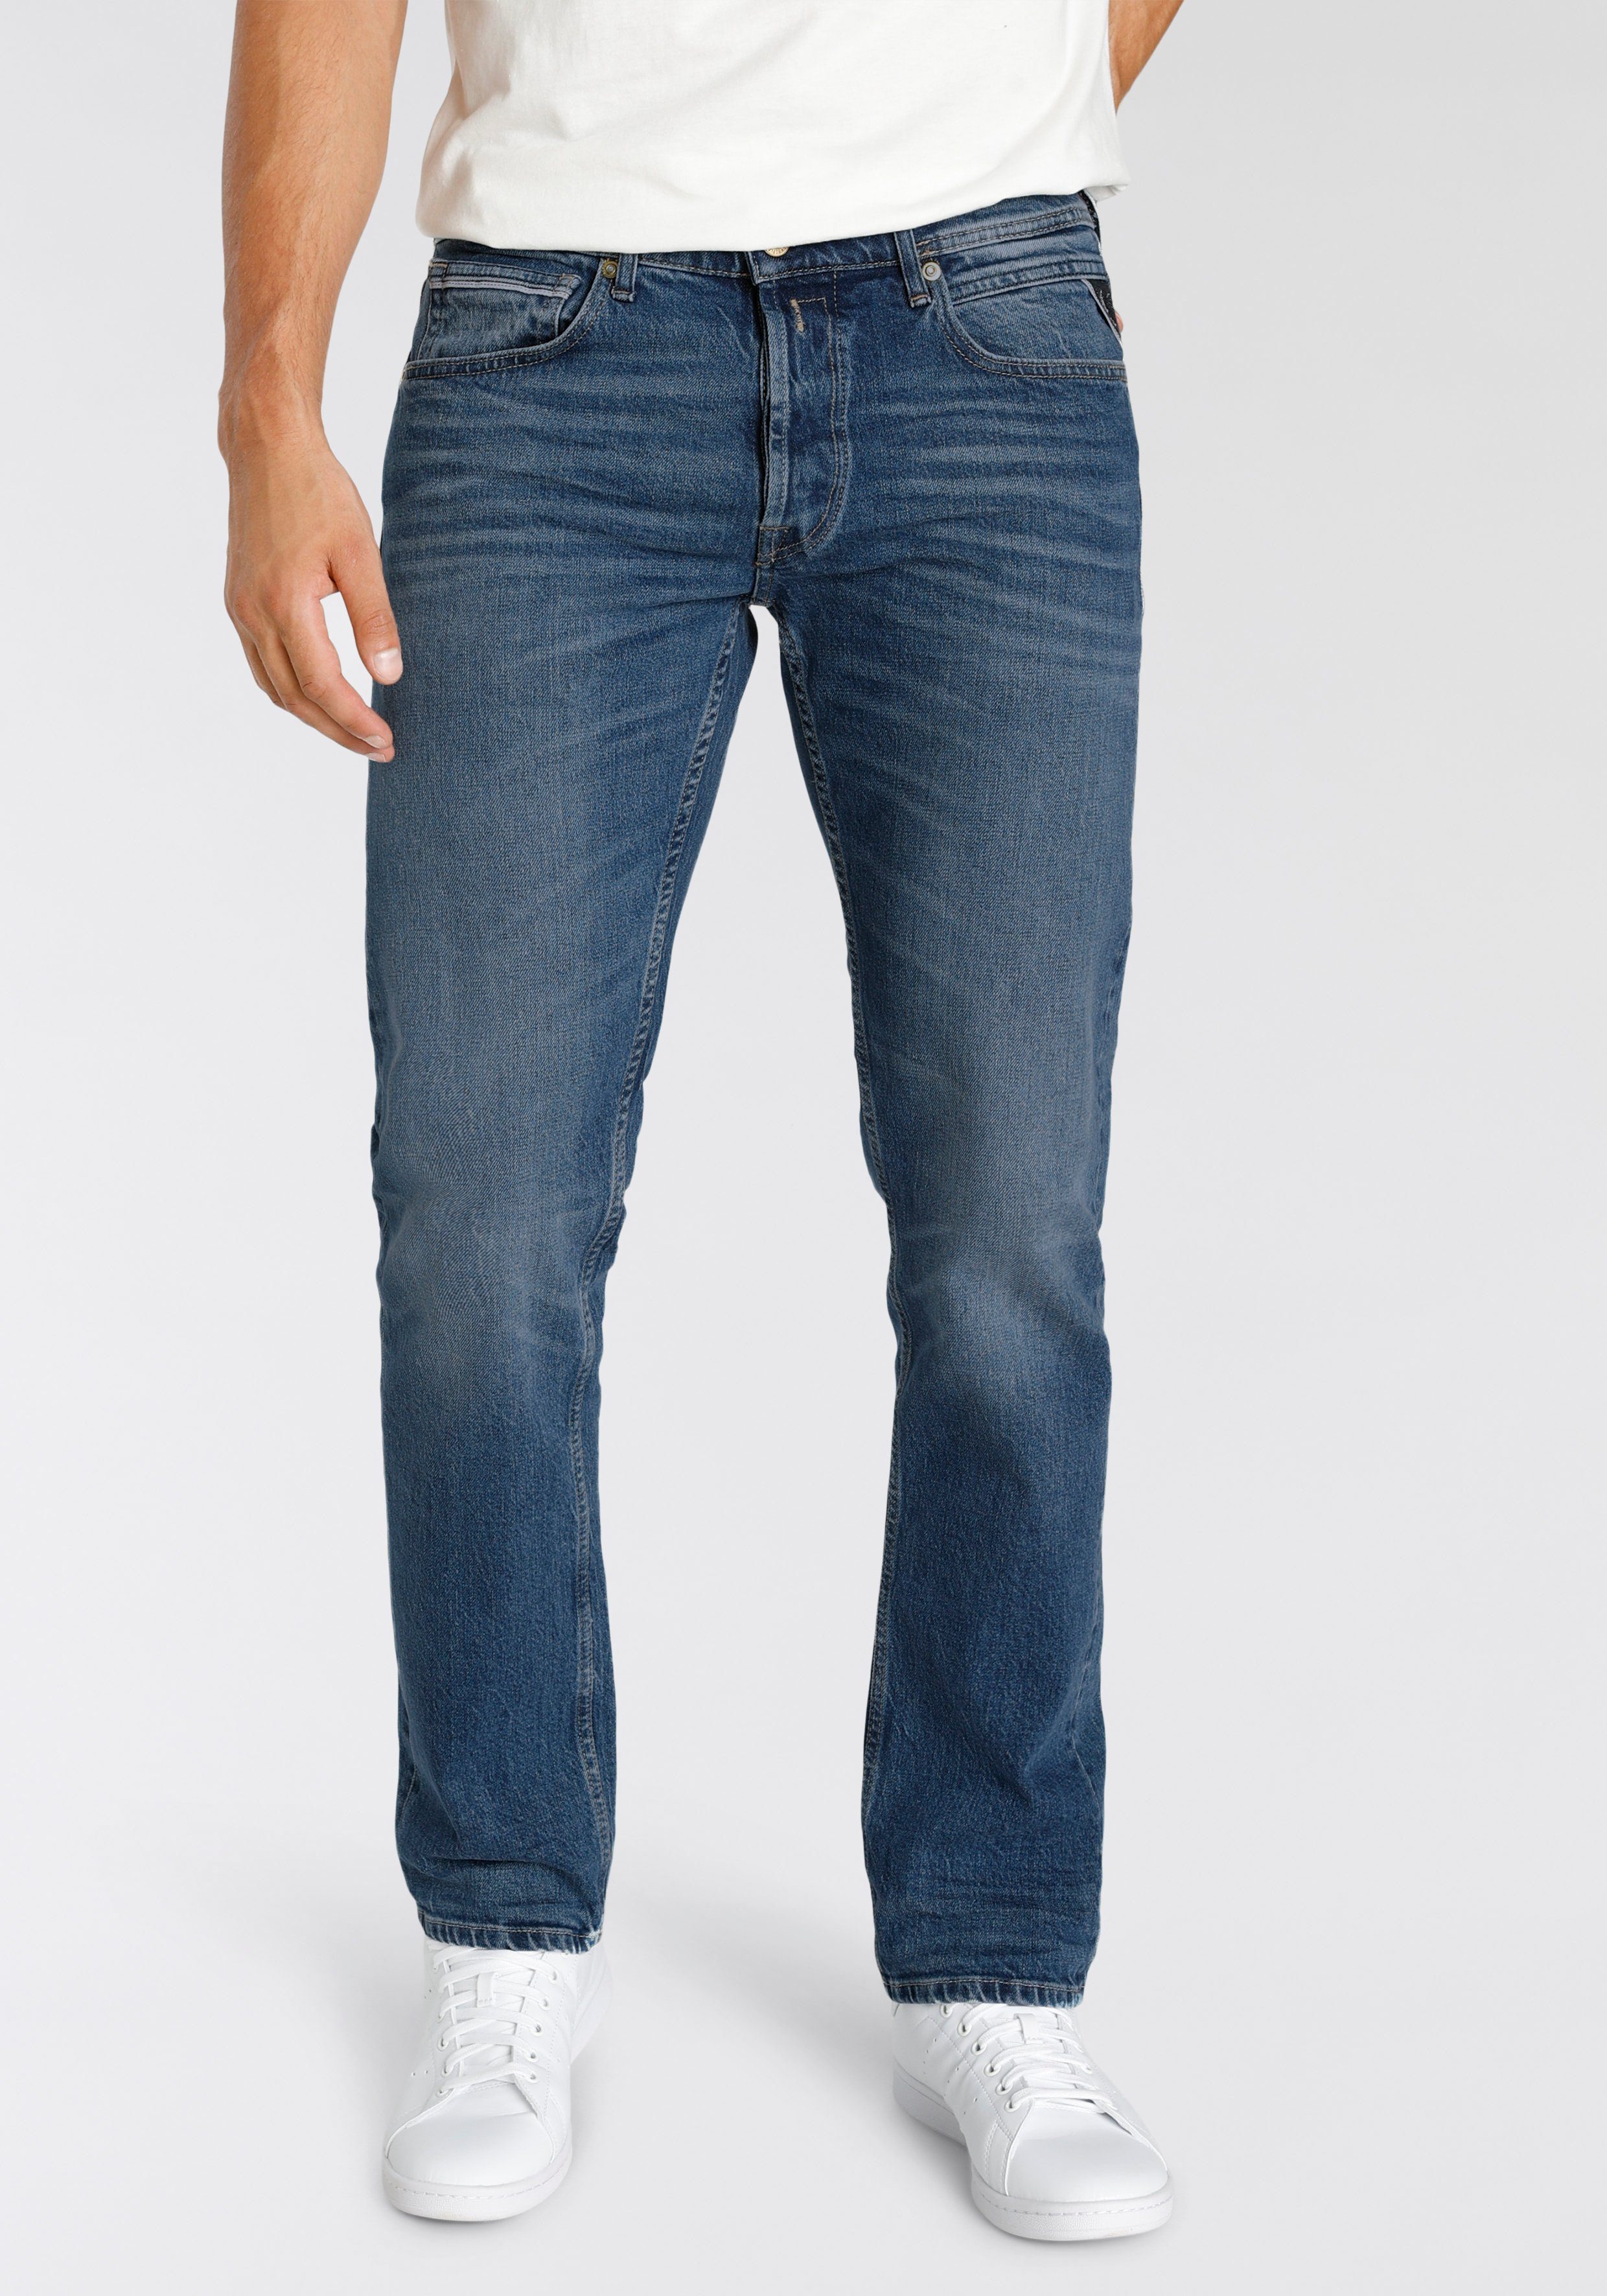 Replay Straight-Jeans dezenter in GROVER Used-Waschung